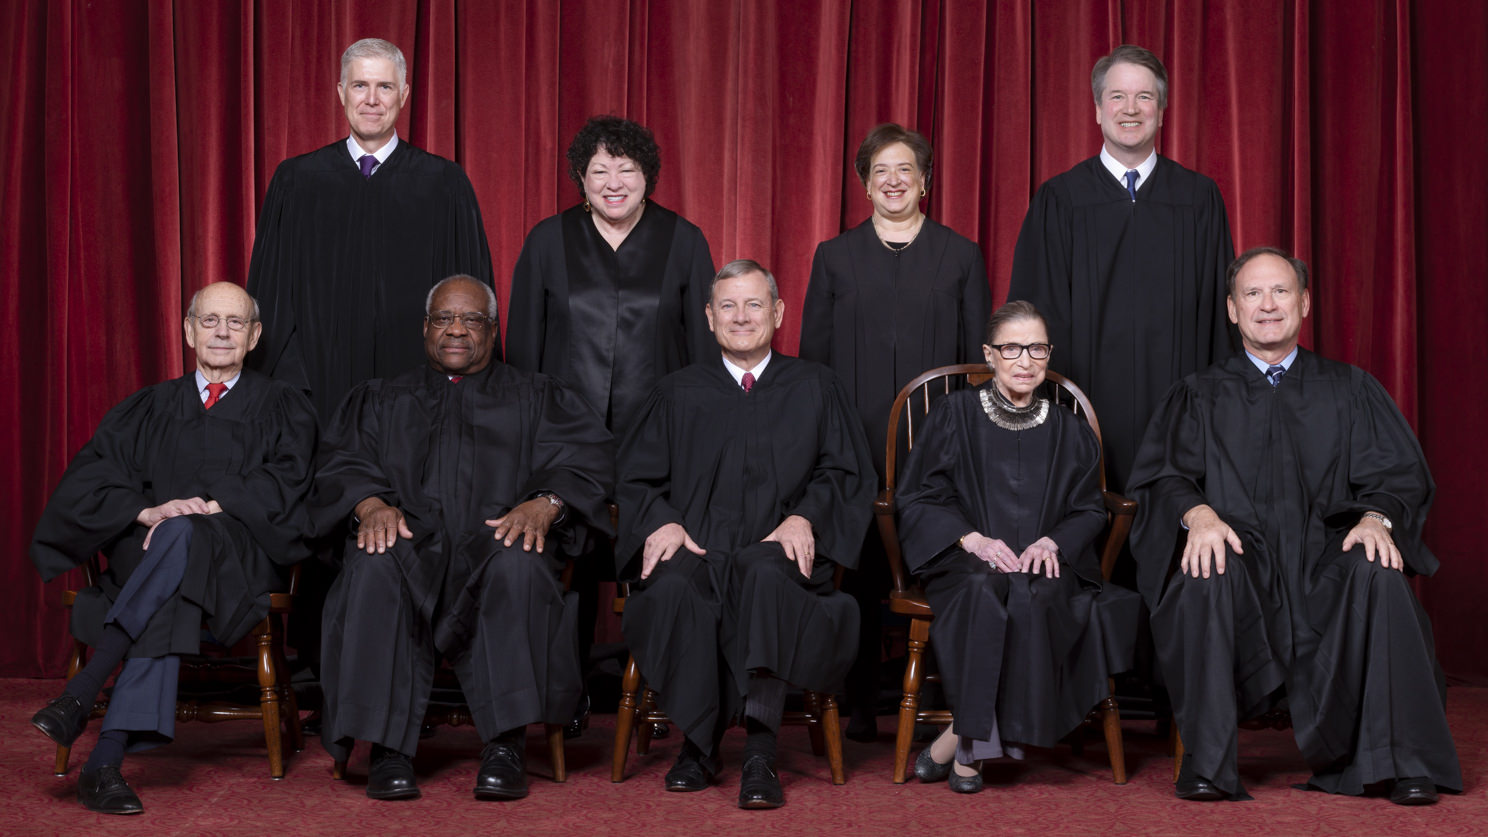 Photo of the US Supreme Court Justices composed 10/06/2018–09/18/2020